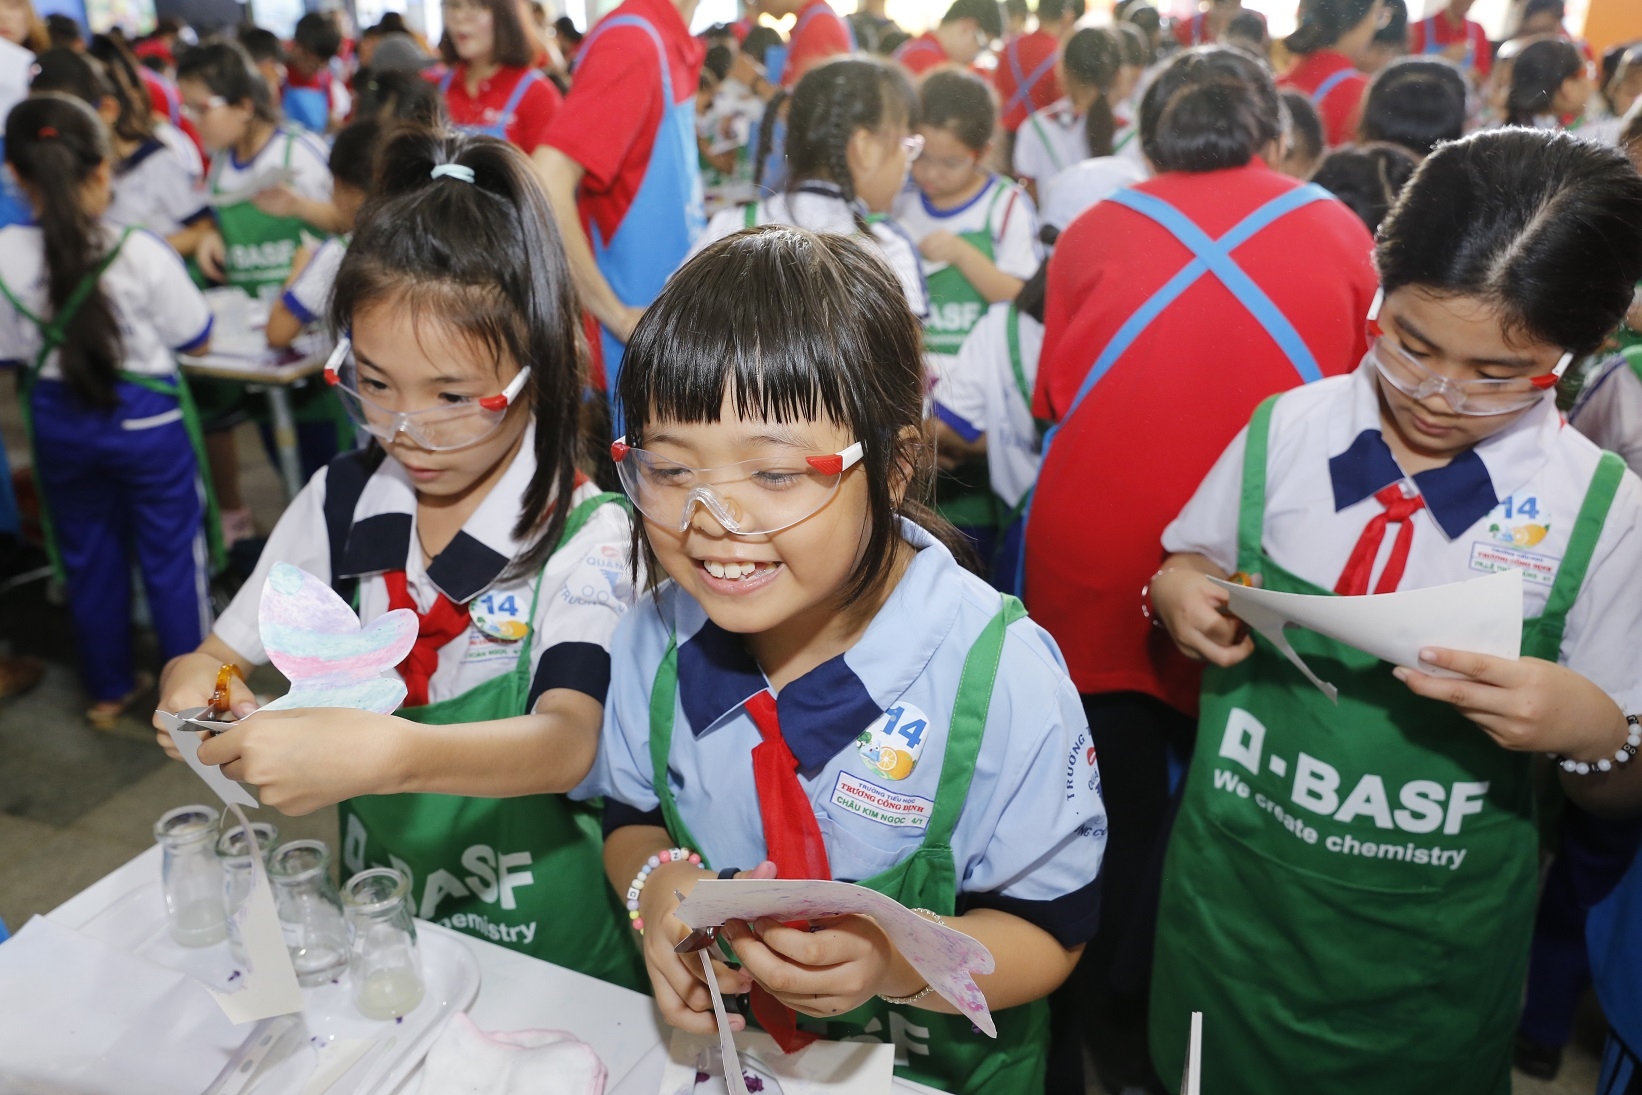 basf kids lab 2018 brings chemistry to the young and needy